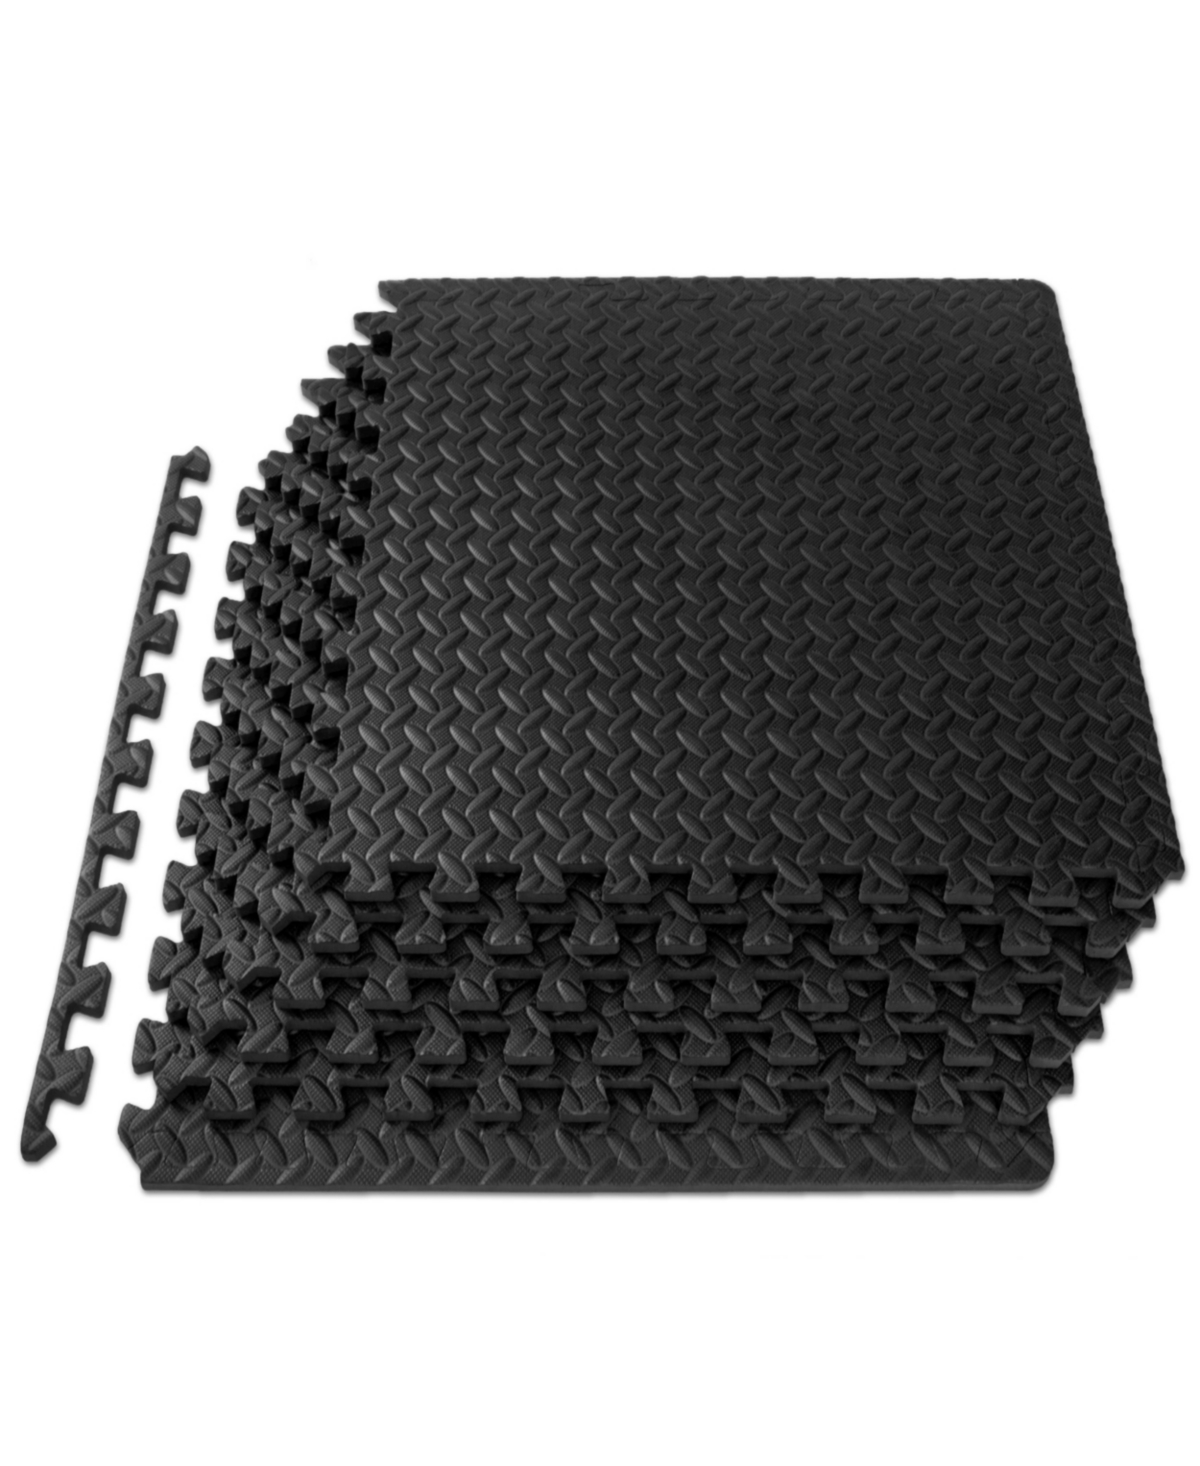 Exercise Puzzle Mat 1/2-in, 24 Sq Ft - 6 Tiles - Black